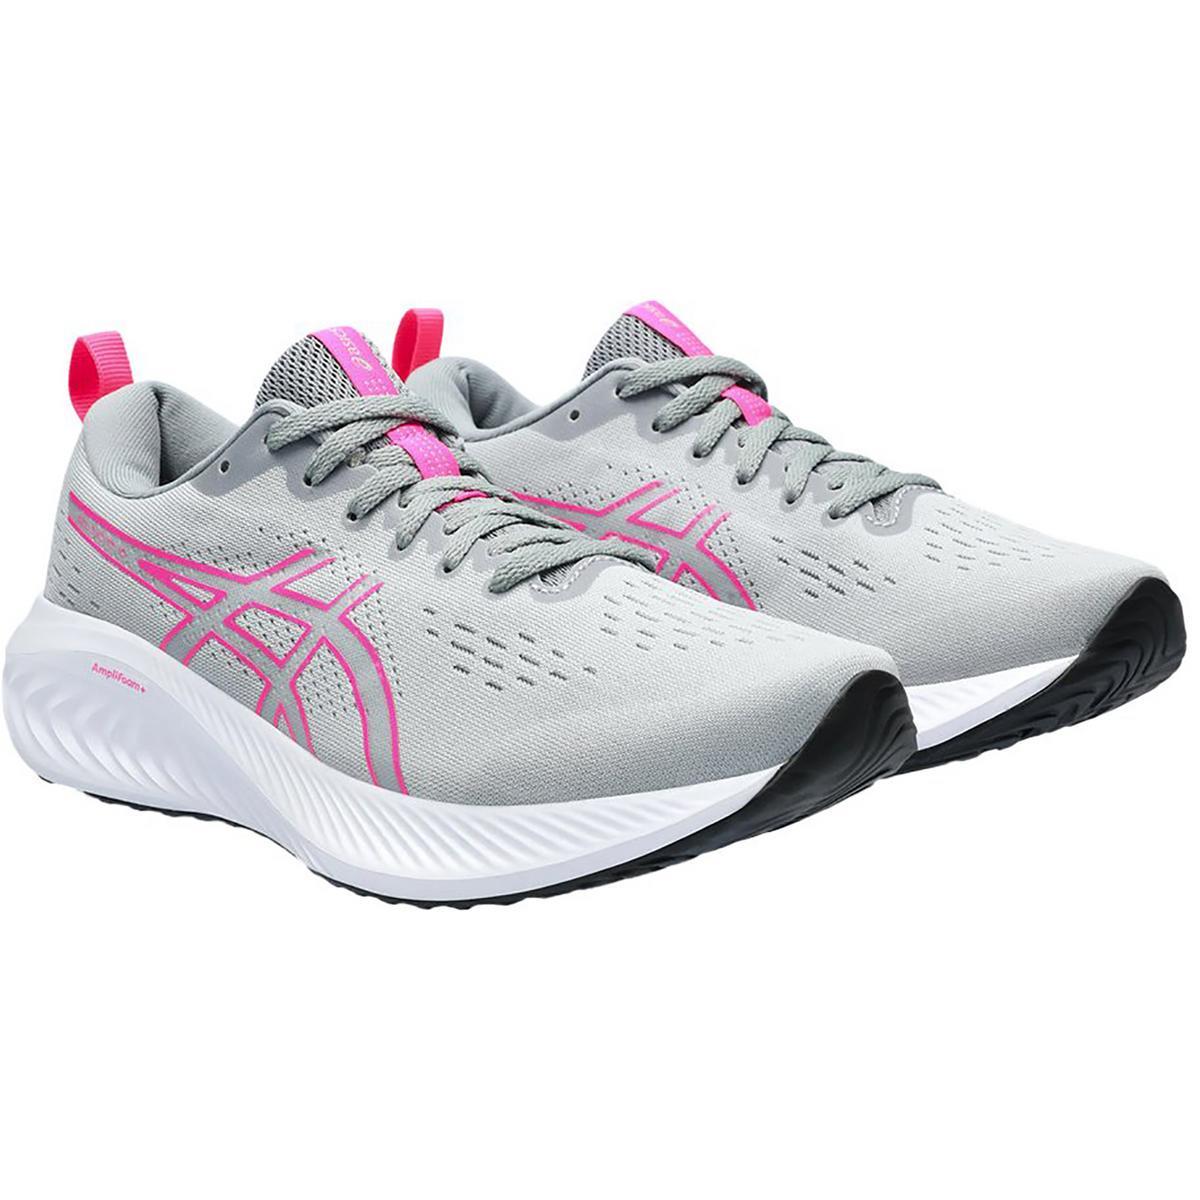 Asics Womens Gel-excite 10 Fitness Running Training Shoes Sneakers Bhfo 3243 Piedmont Grey/Hot Pink